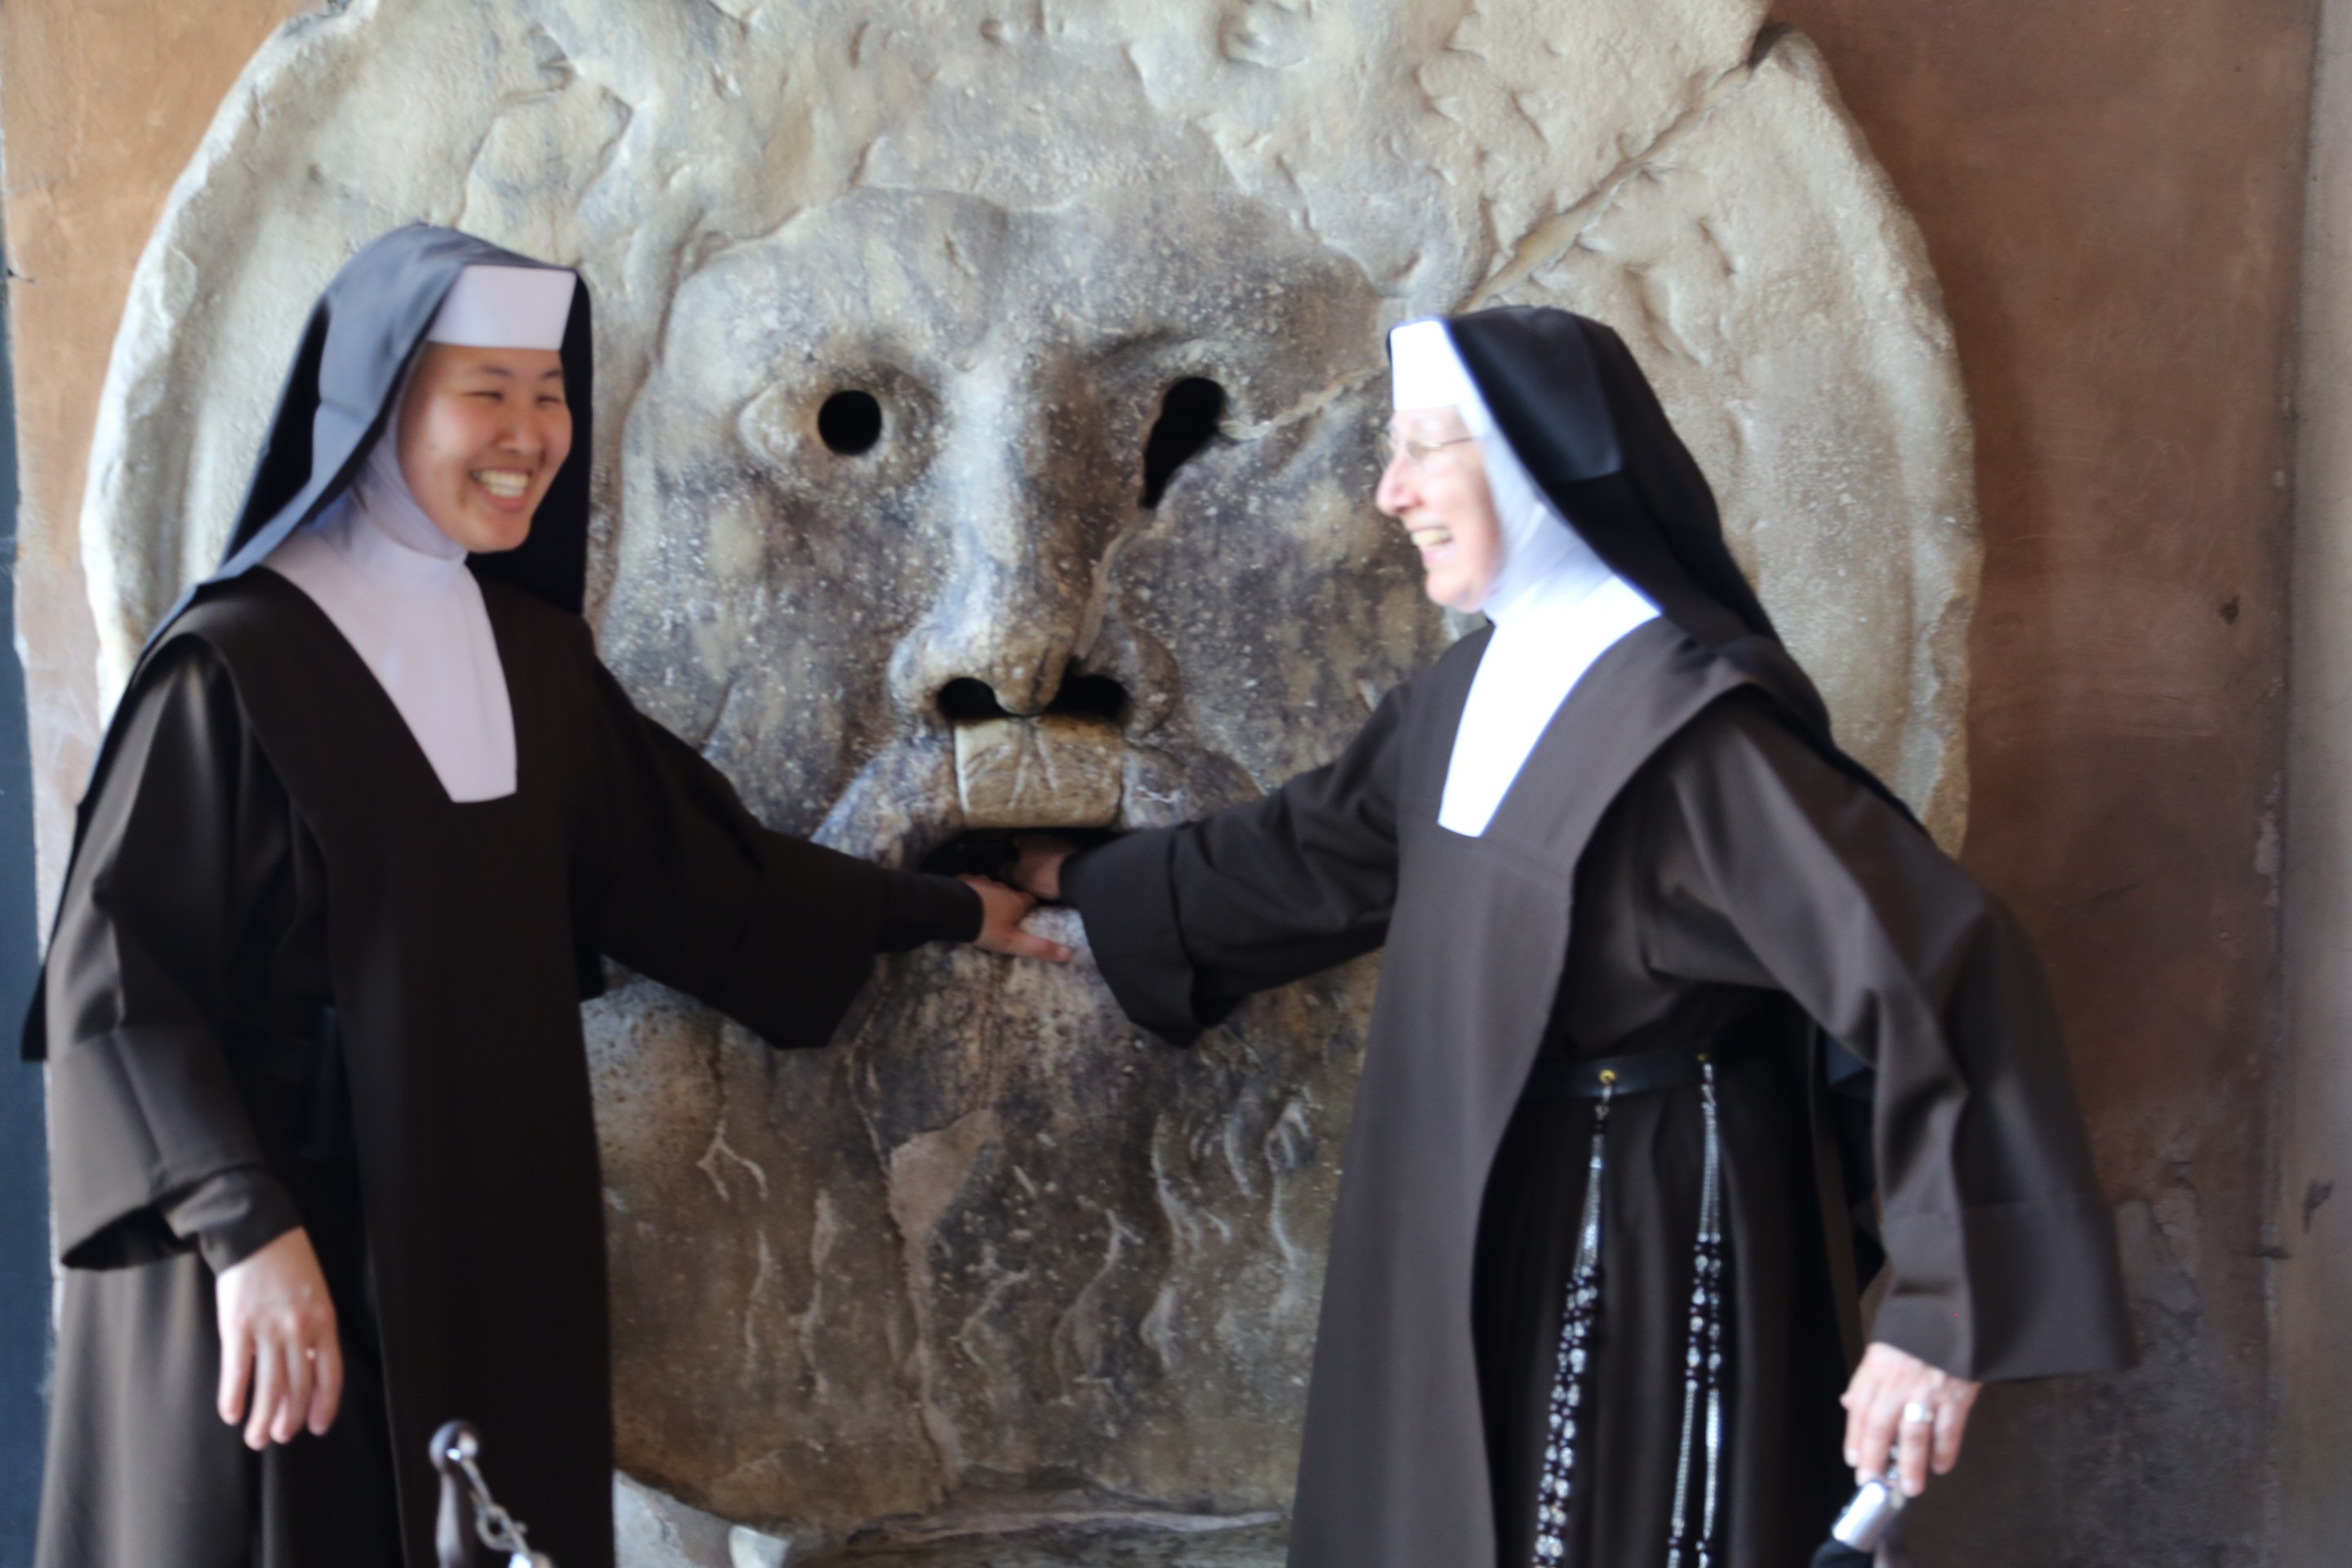 Carmelite Sisters Mouth of Truth in Rome